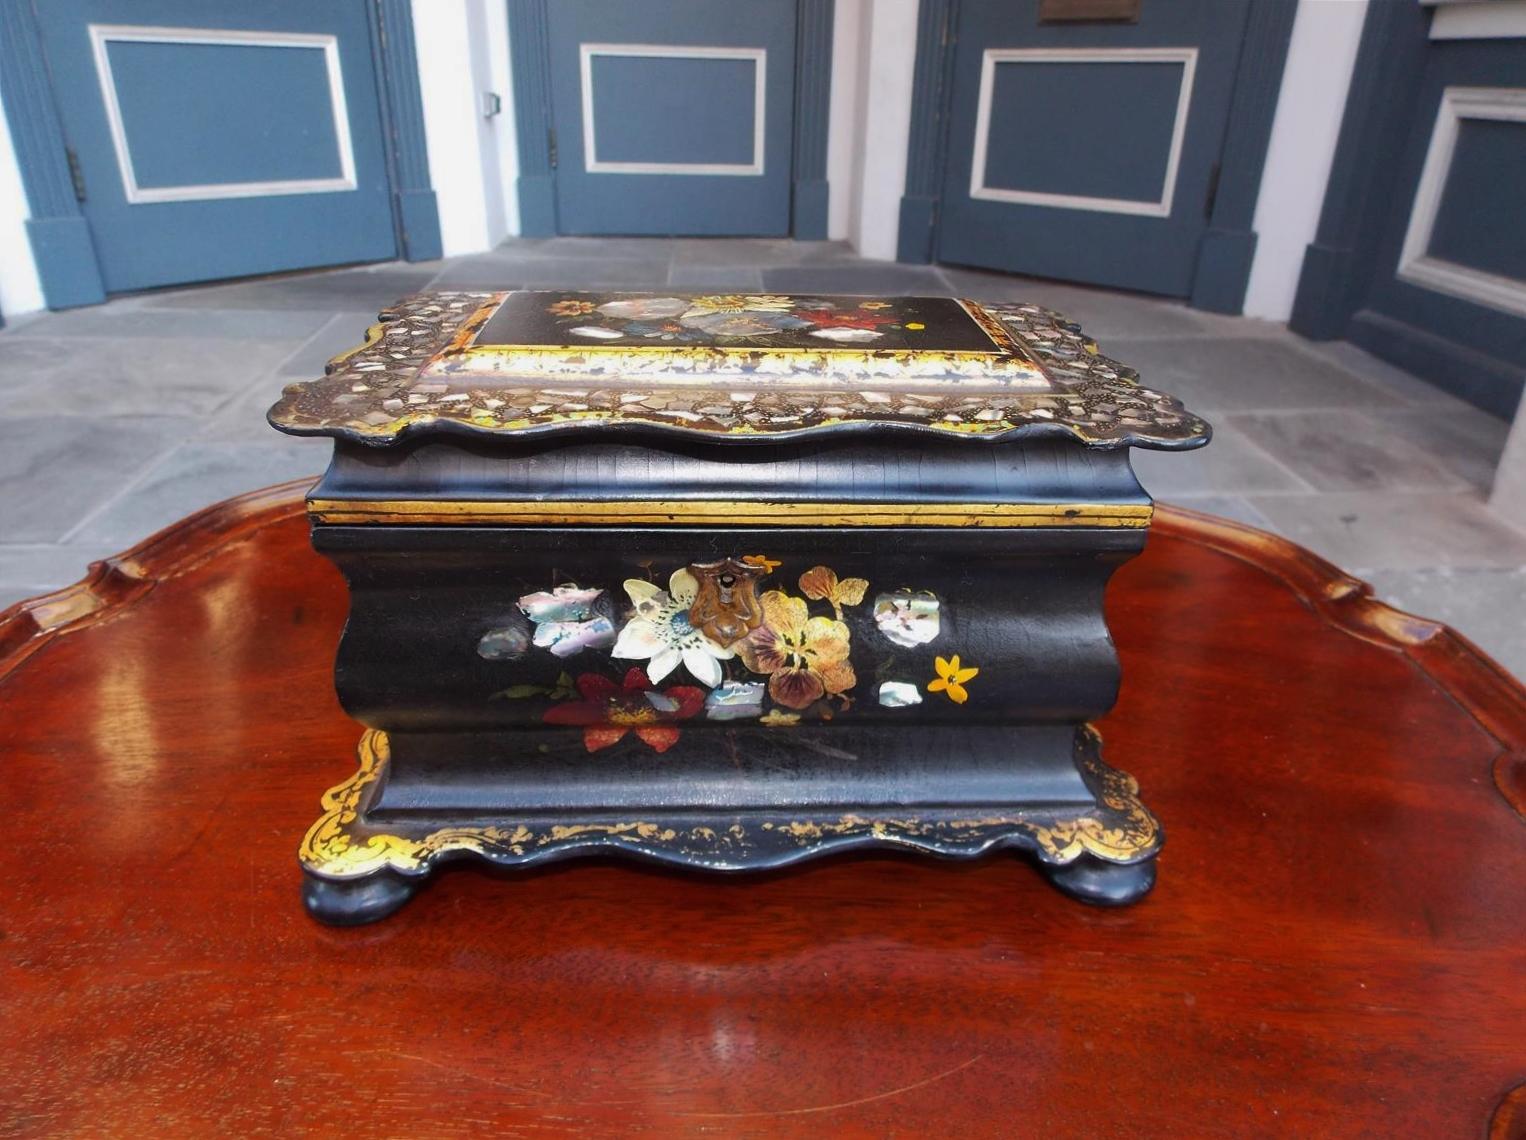 English black lacquered Papier mache and mother of pearl inlaid hinged tea caddy with scalloped edge carvings, two lidded foil lined interior compartments, and resting on the original bun feet. Early 19th century.